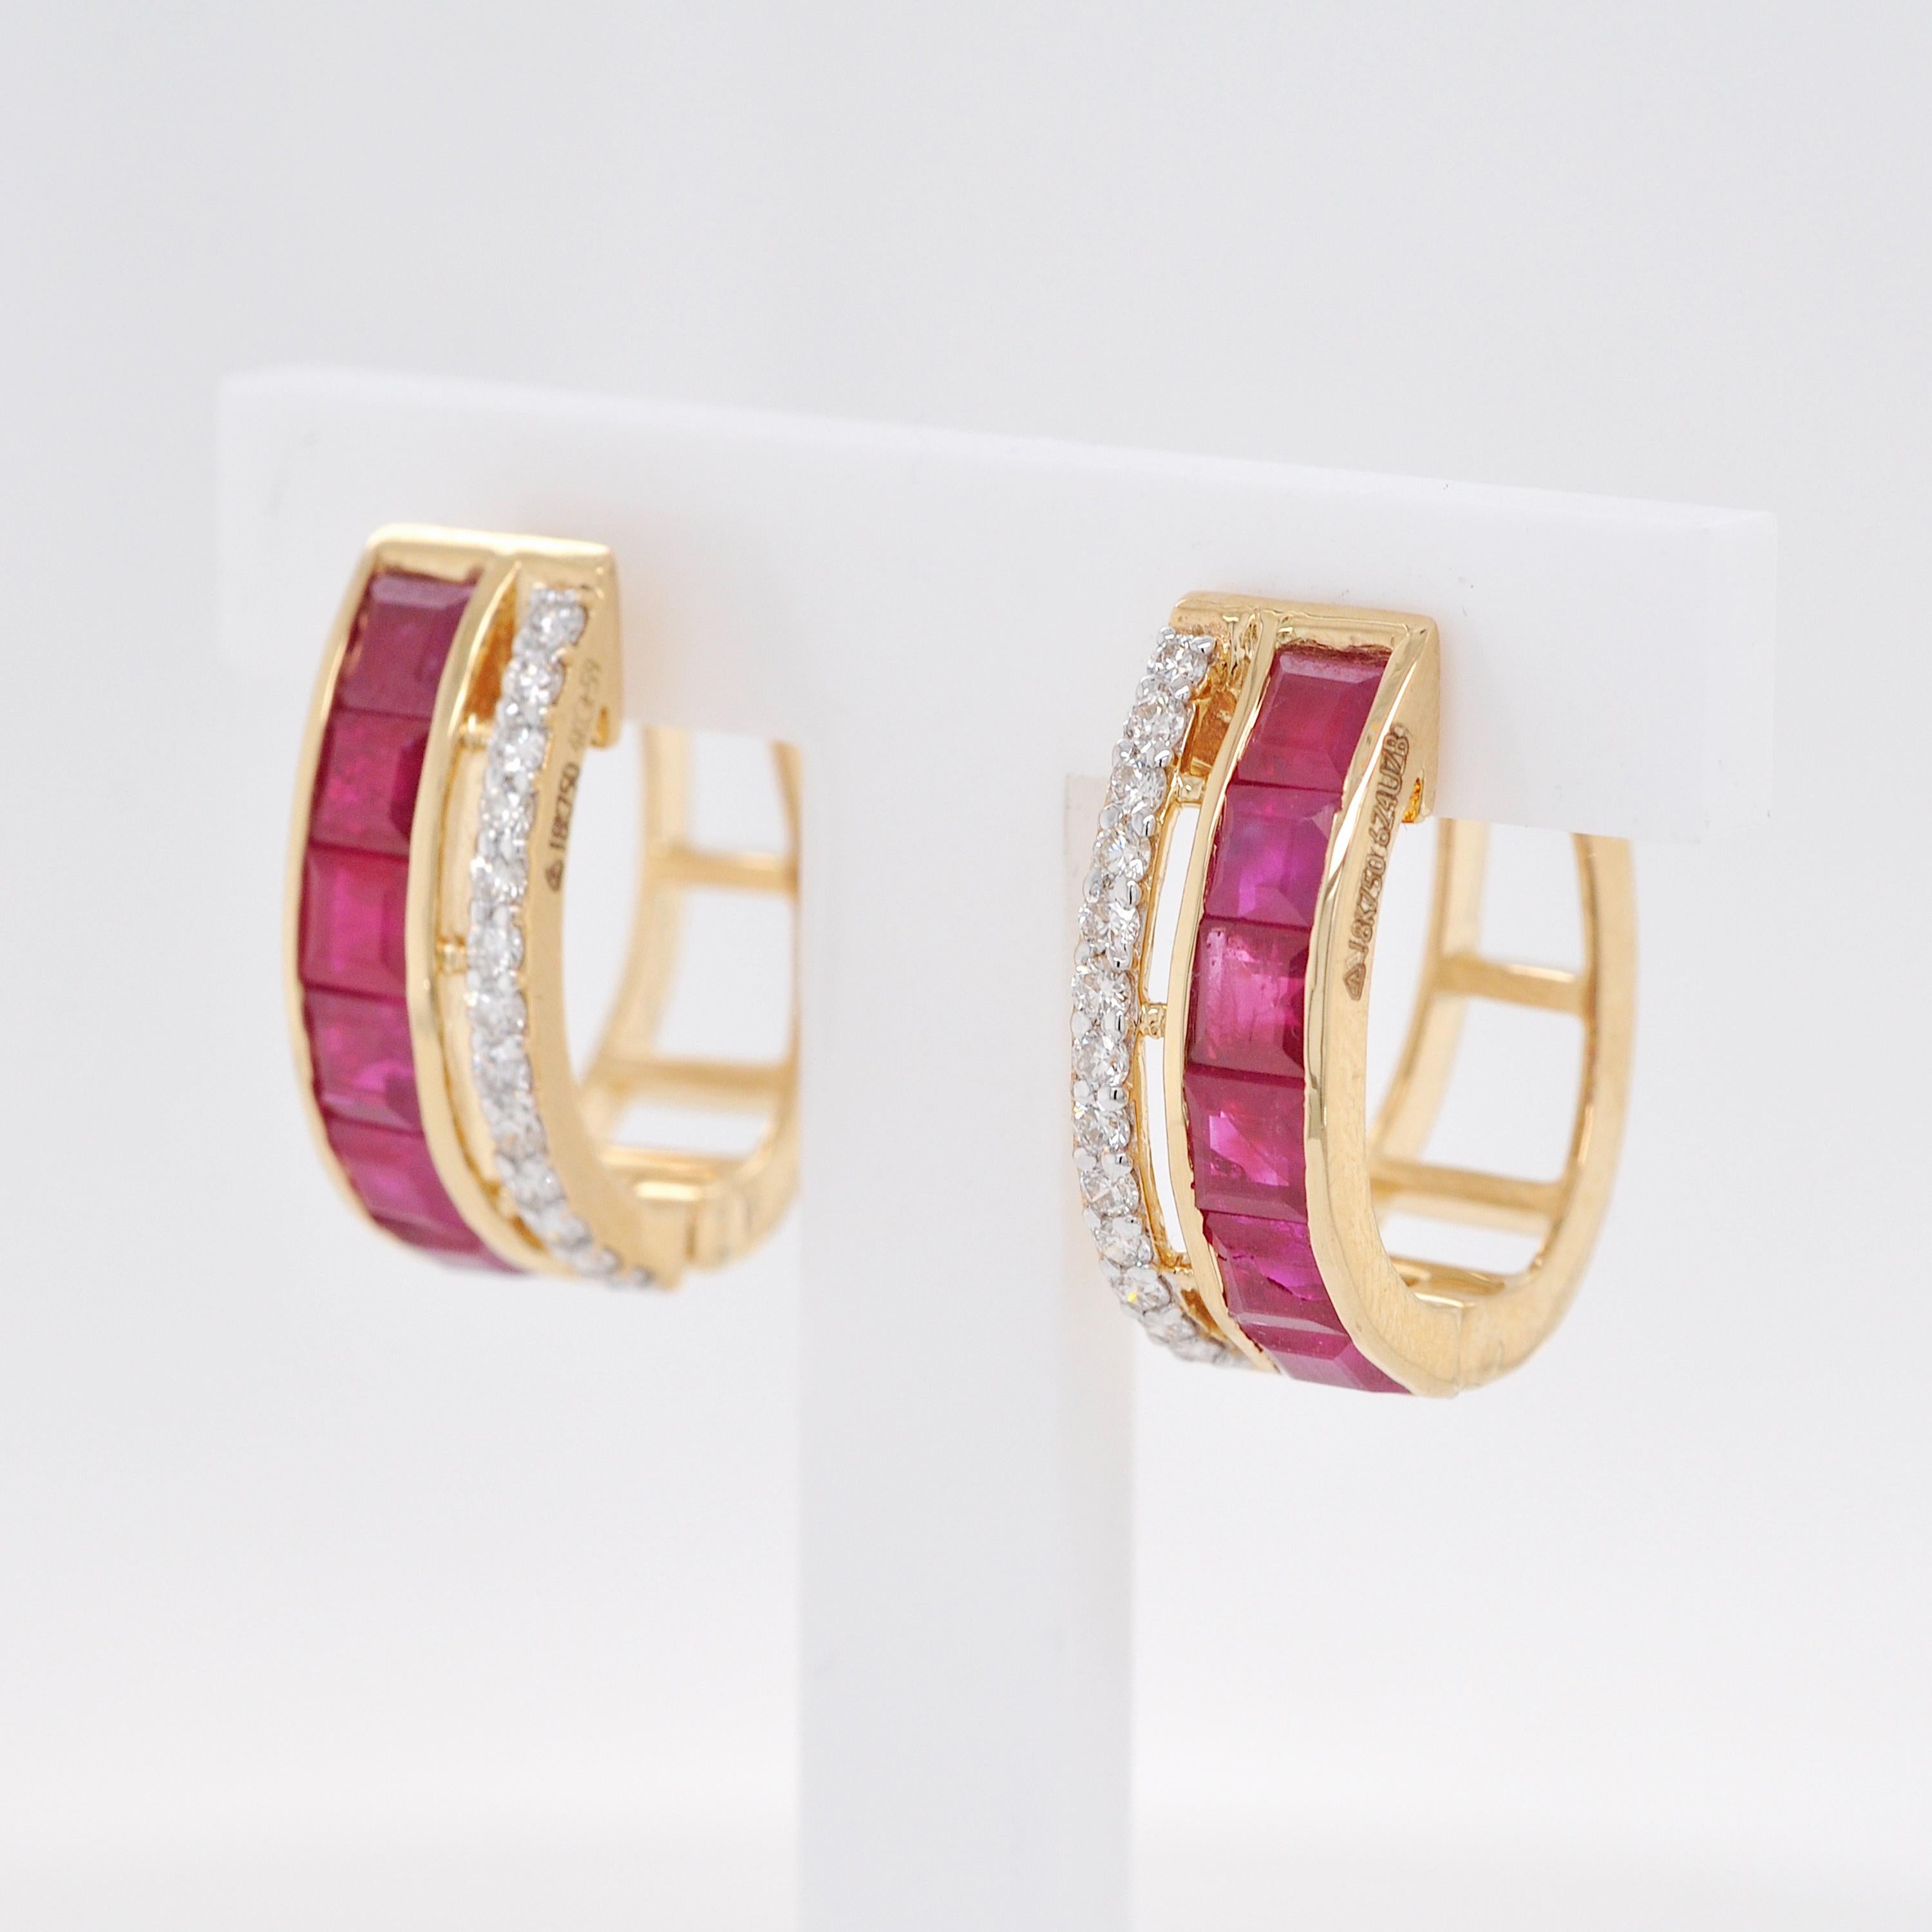 18K Yellow Gold 3 MM Square Mozambique Ruby Channel-set Diamond Hoop Earrings For Sale 3